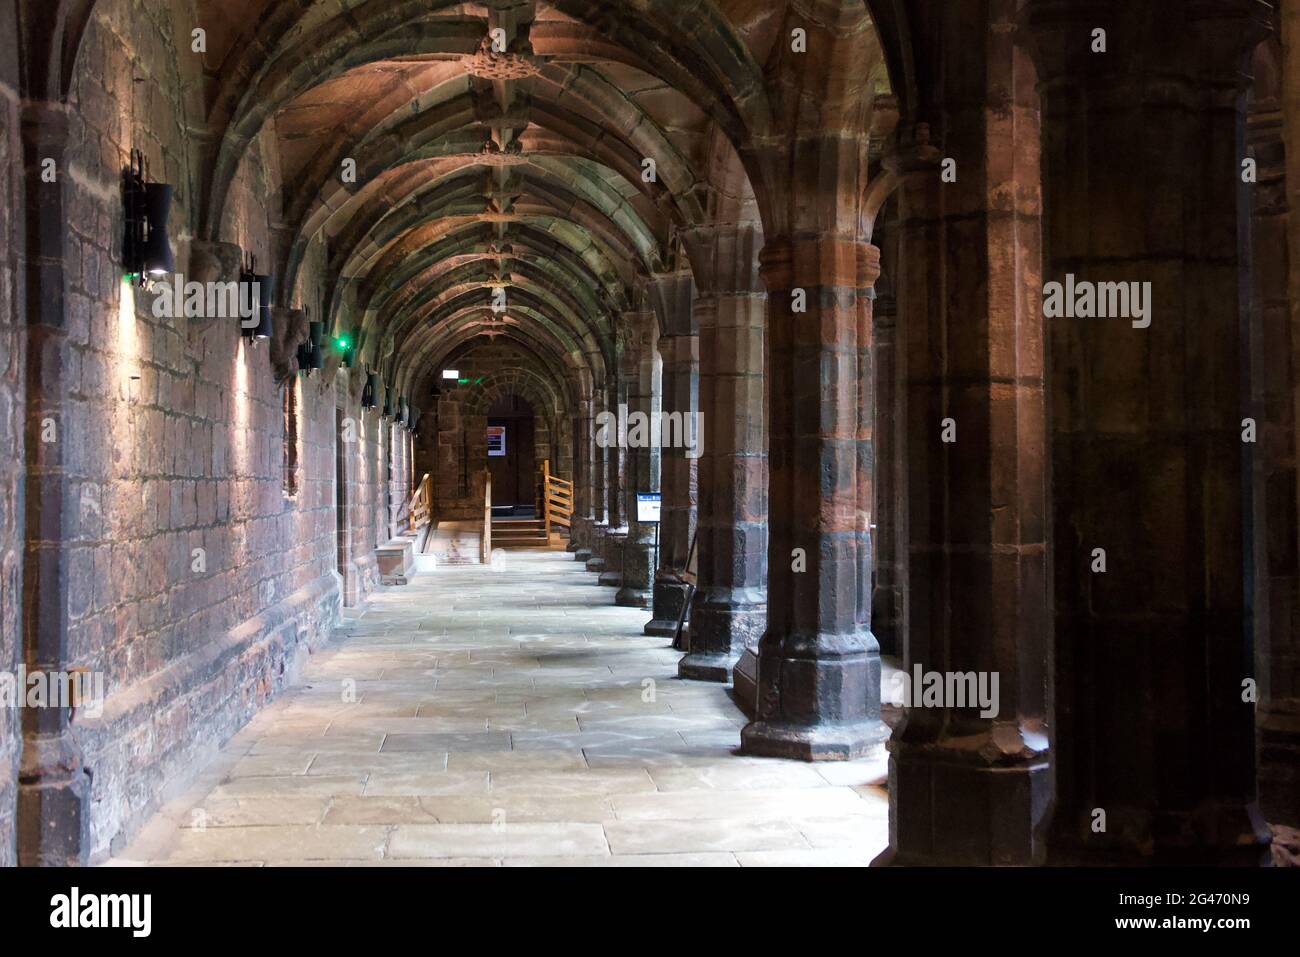 10 June 2021 - Chester, UK: Cloisters at Chester Cathedral Stock Photo